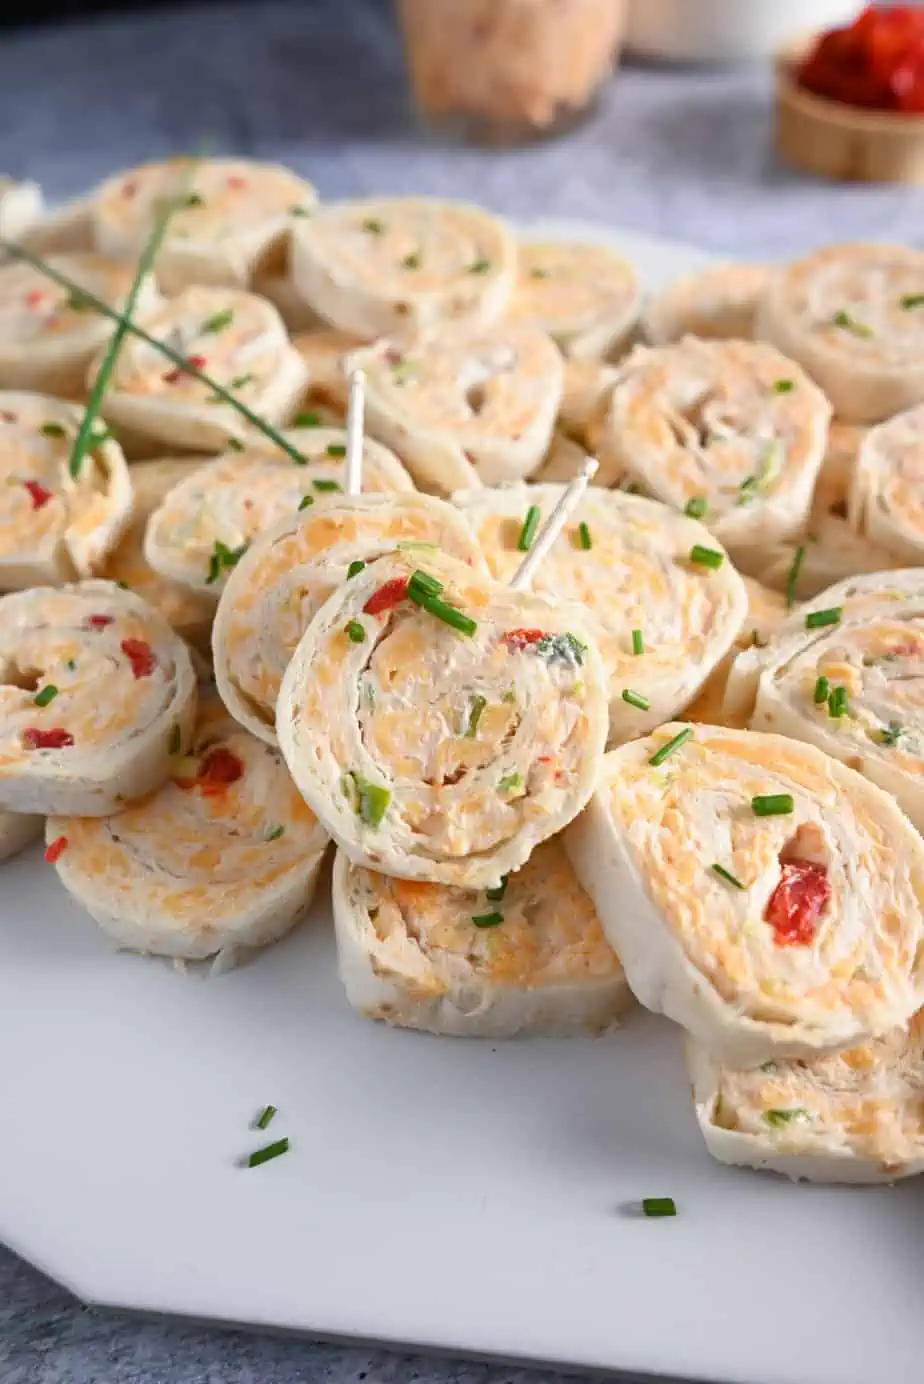 Platter of pimento cheese pinwheels with toothpicks in two of the pinwheels, ready to be taken.